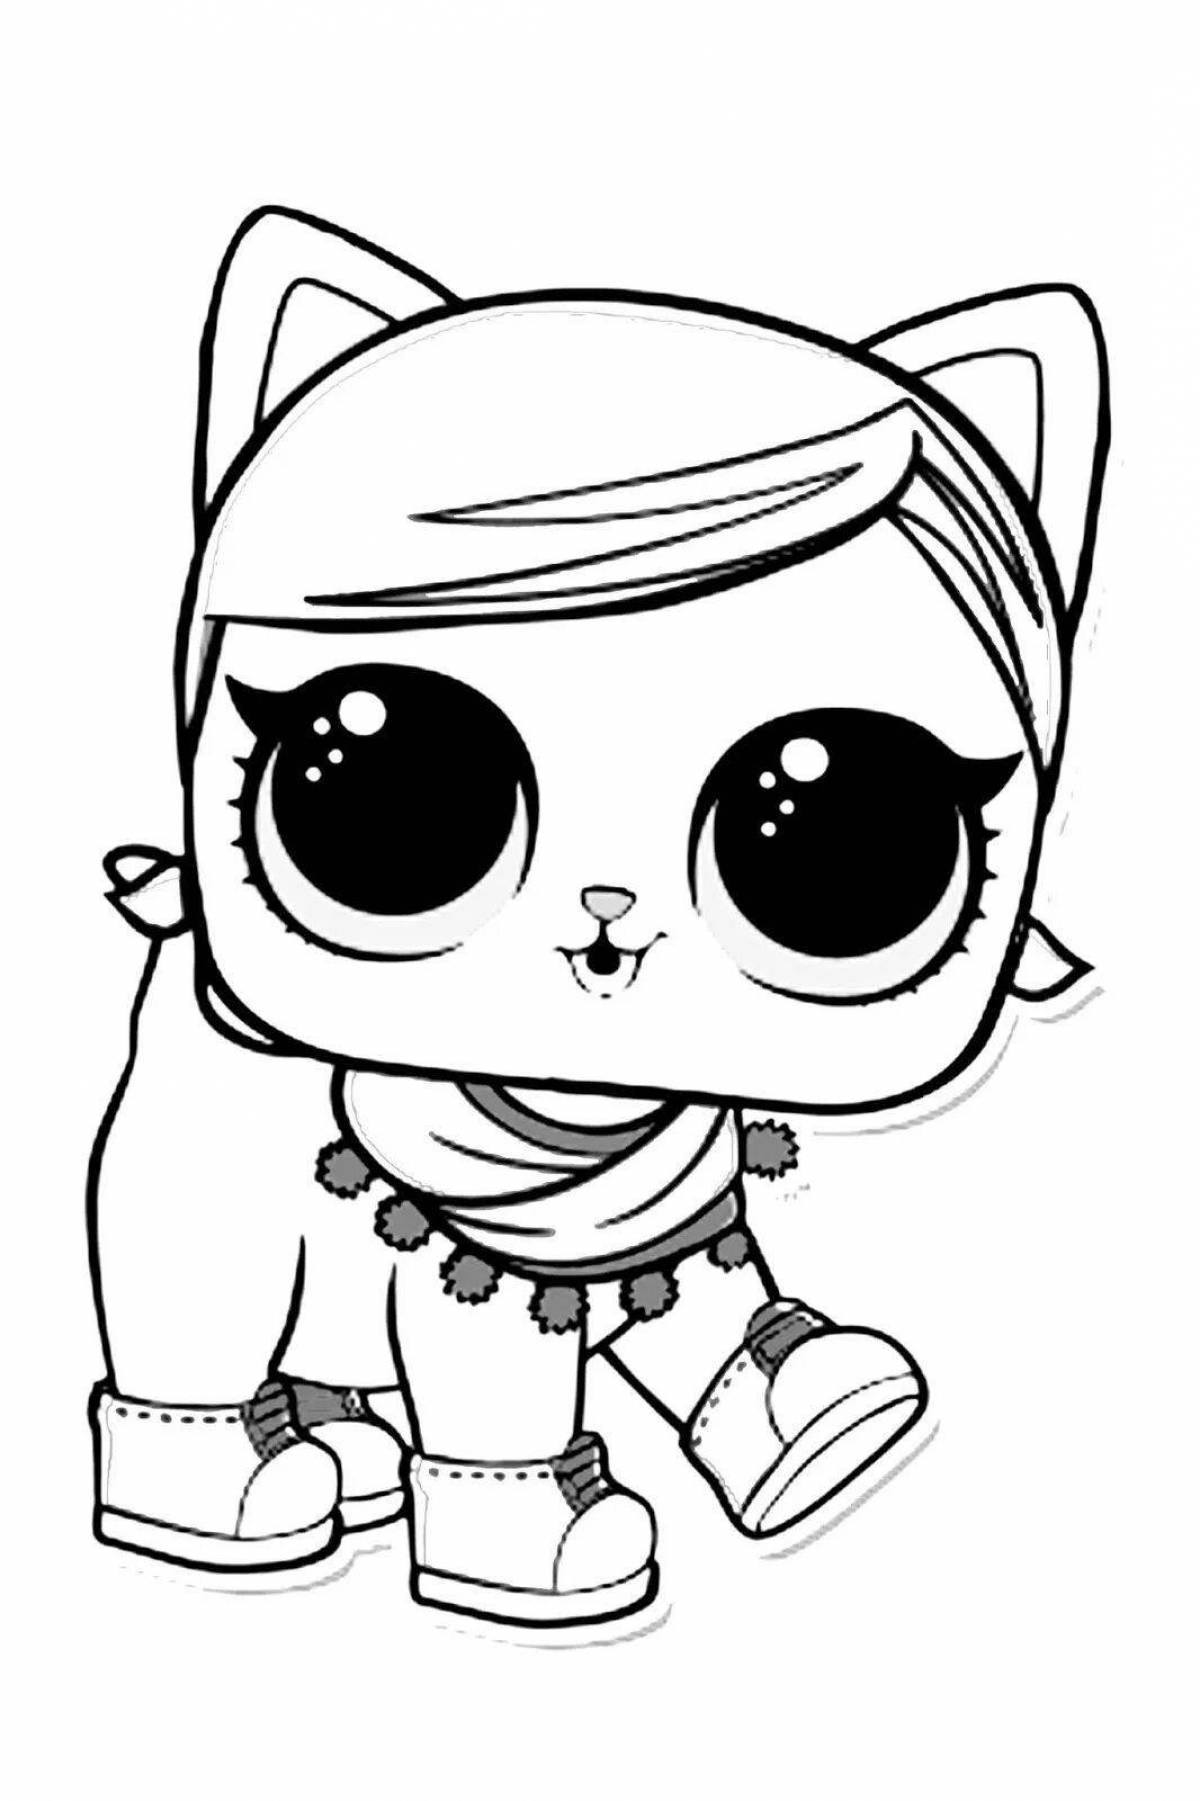 Dazzling coloring page doll lol cat